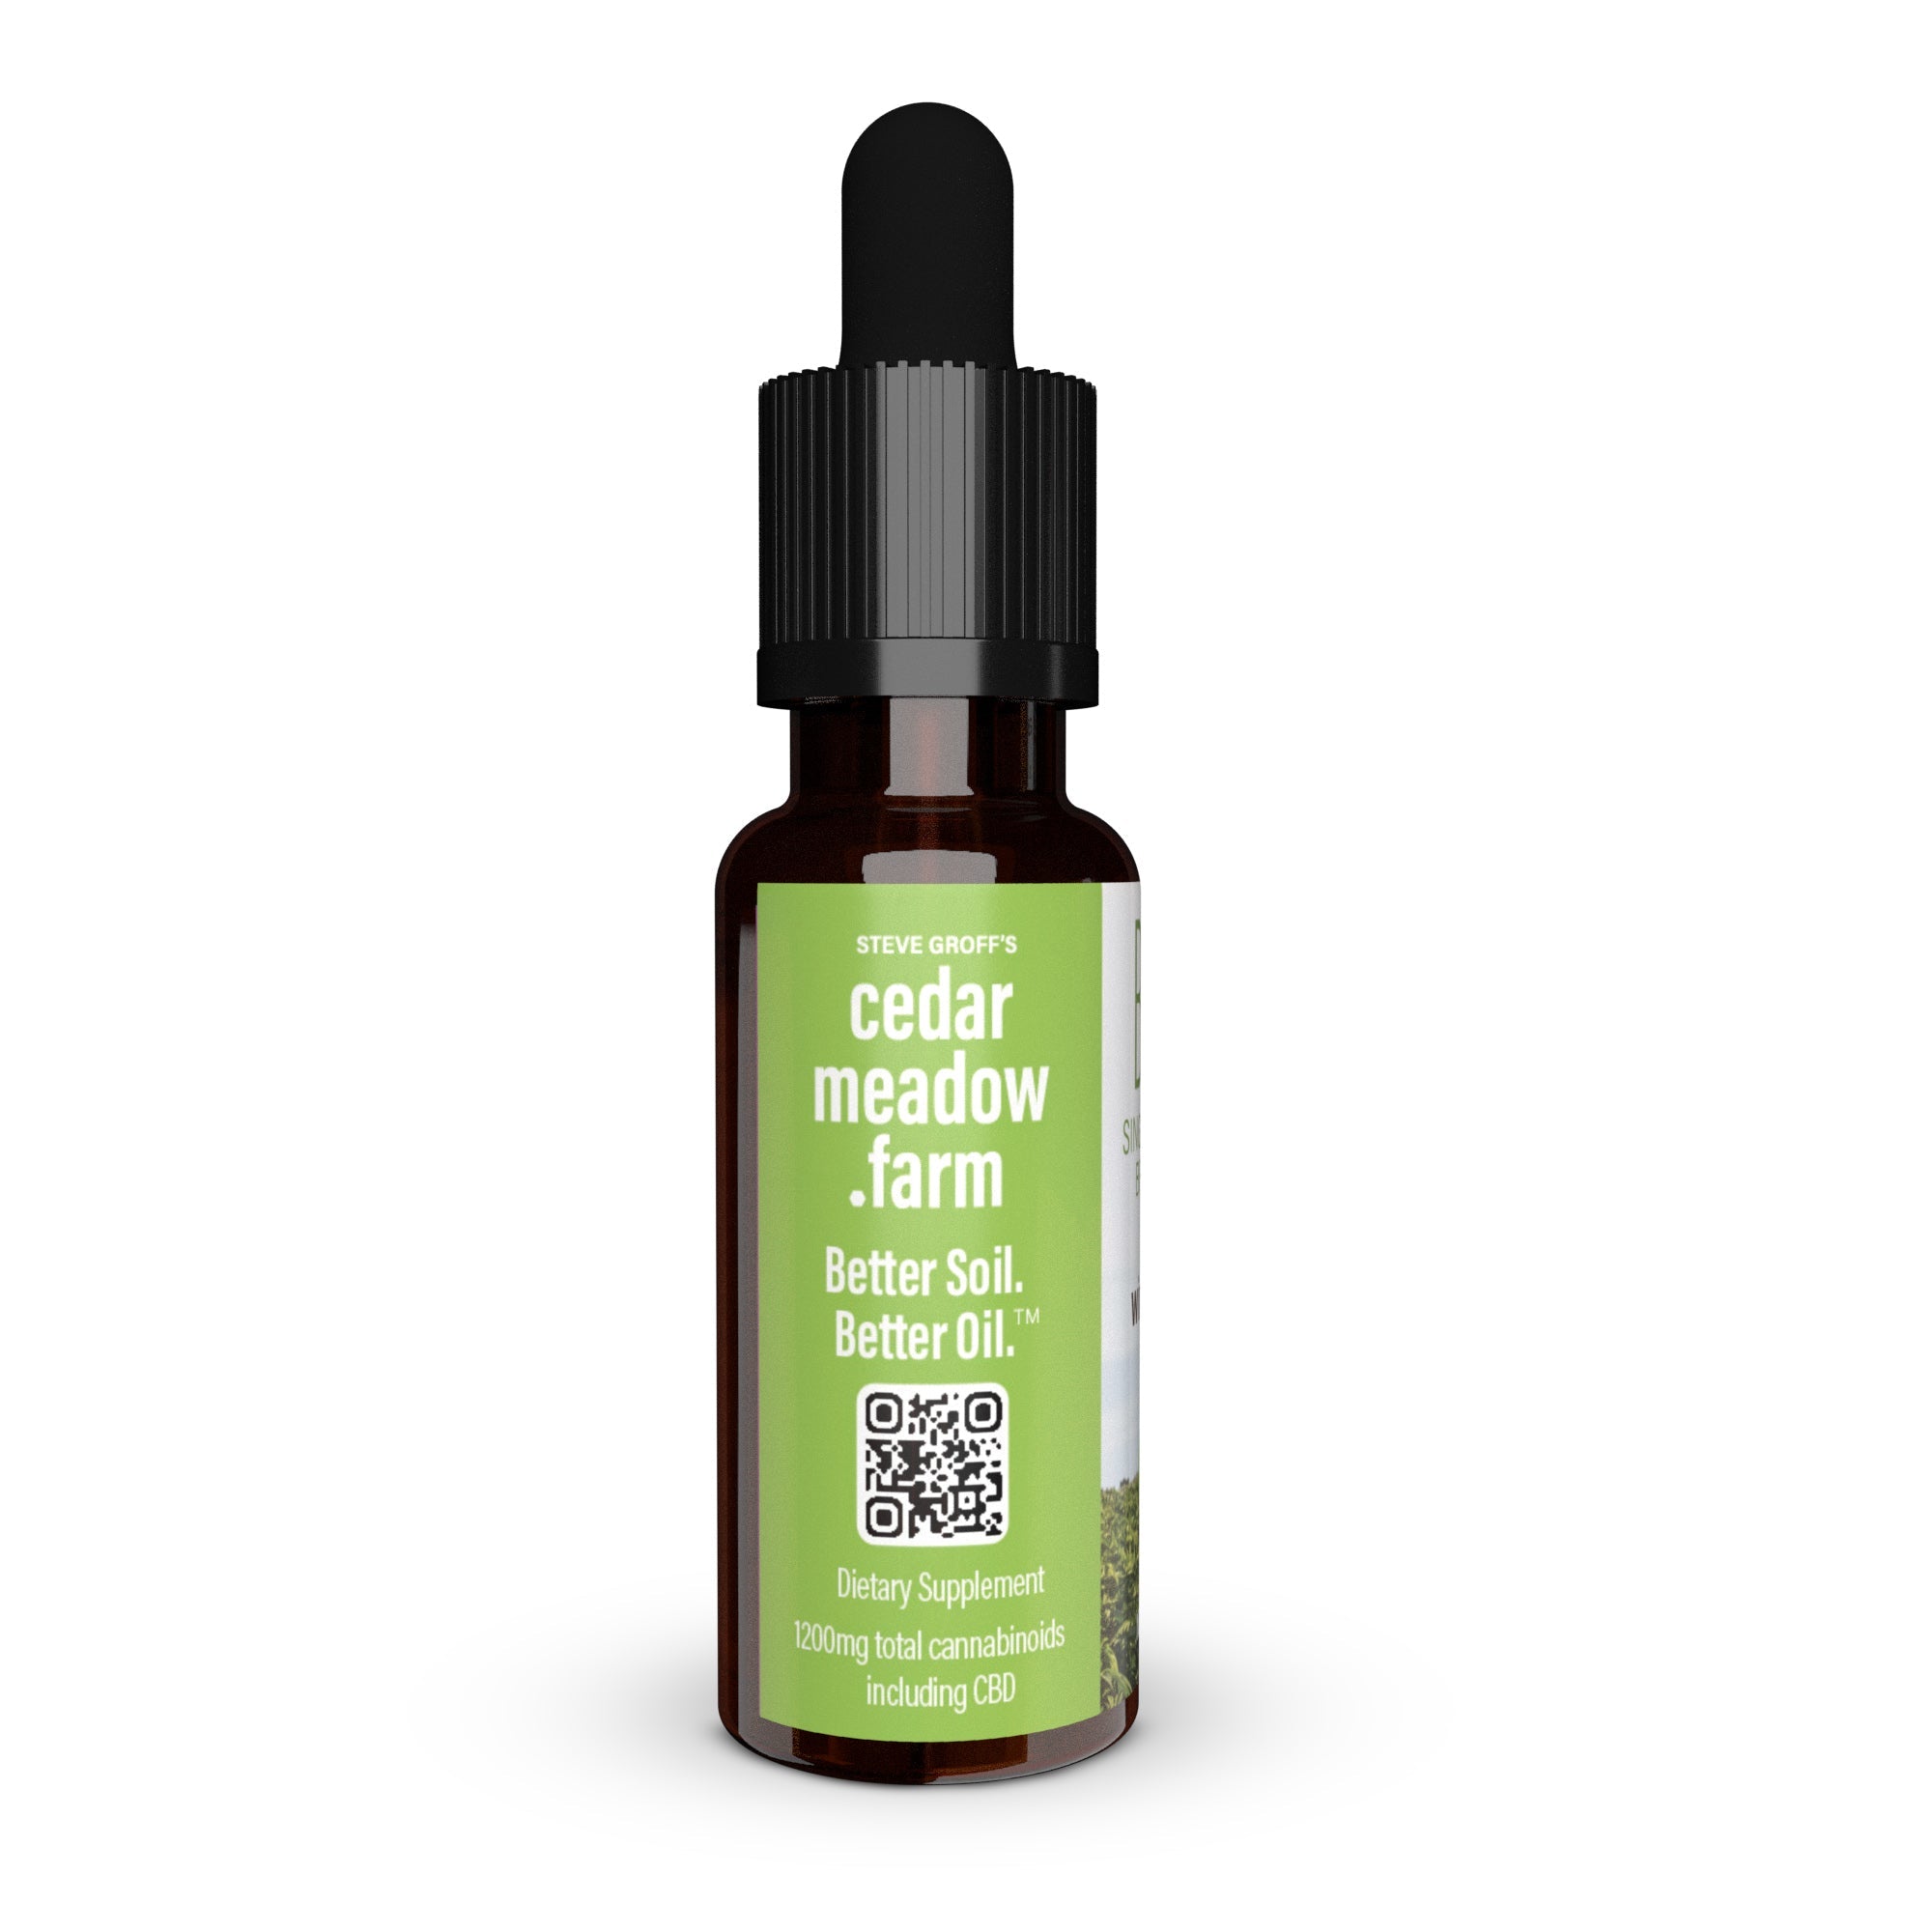 CBD Oil Wintergreen Flavor THC-Free-A crisp new look for the same incredible oil that you've come to love!We made BETTER just for you. Broad Spectrum: All of the naturally-occurring compounds in the-Cedar Meadow Farm